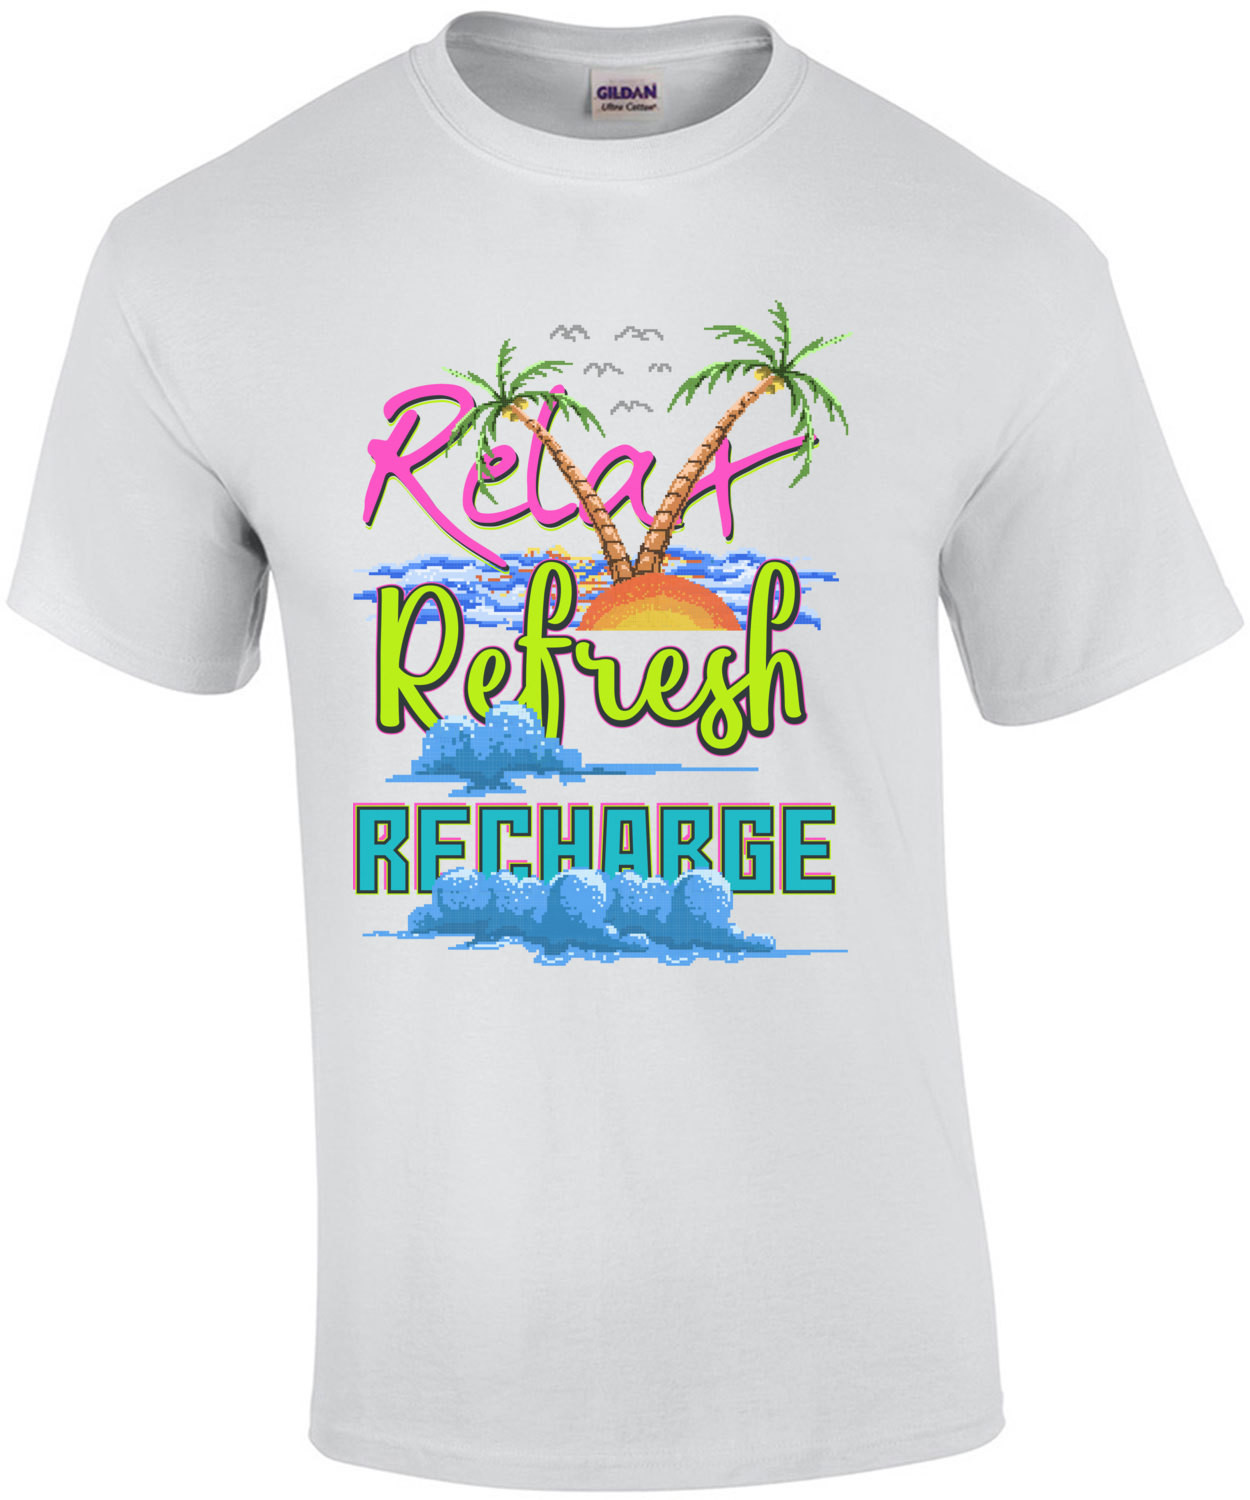 Relax Refresh Recharge Retro Vacation T-Shirt